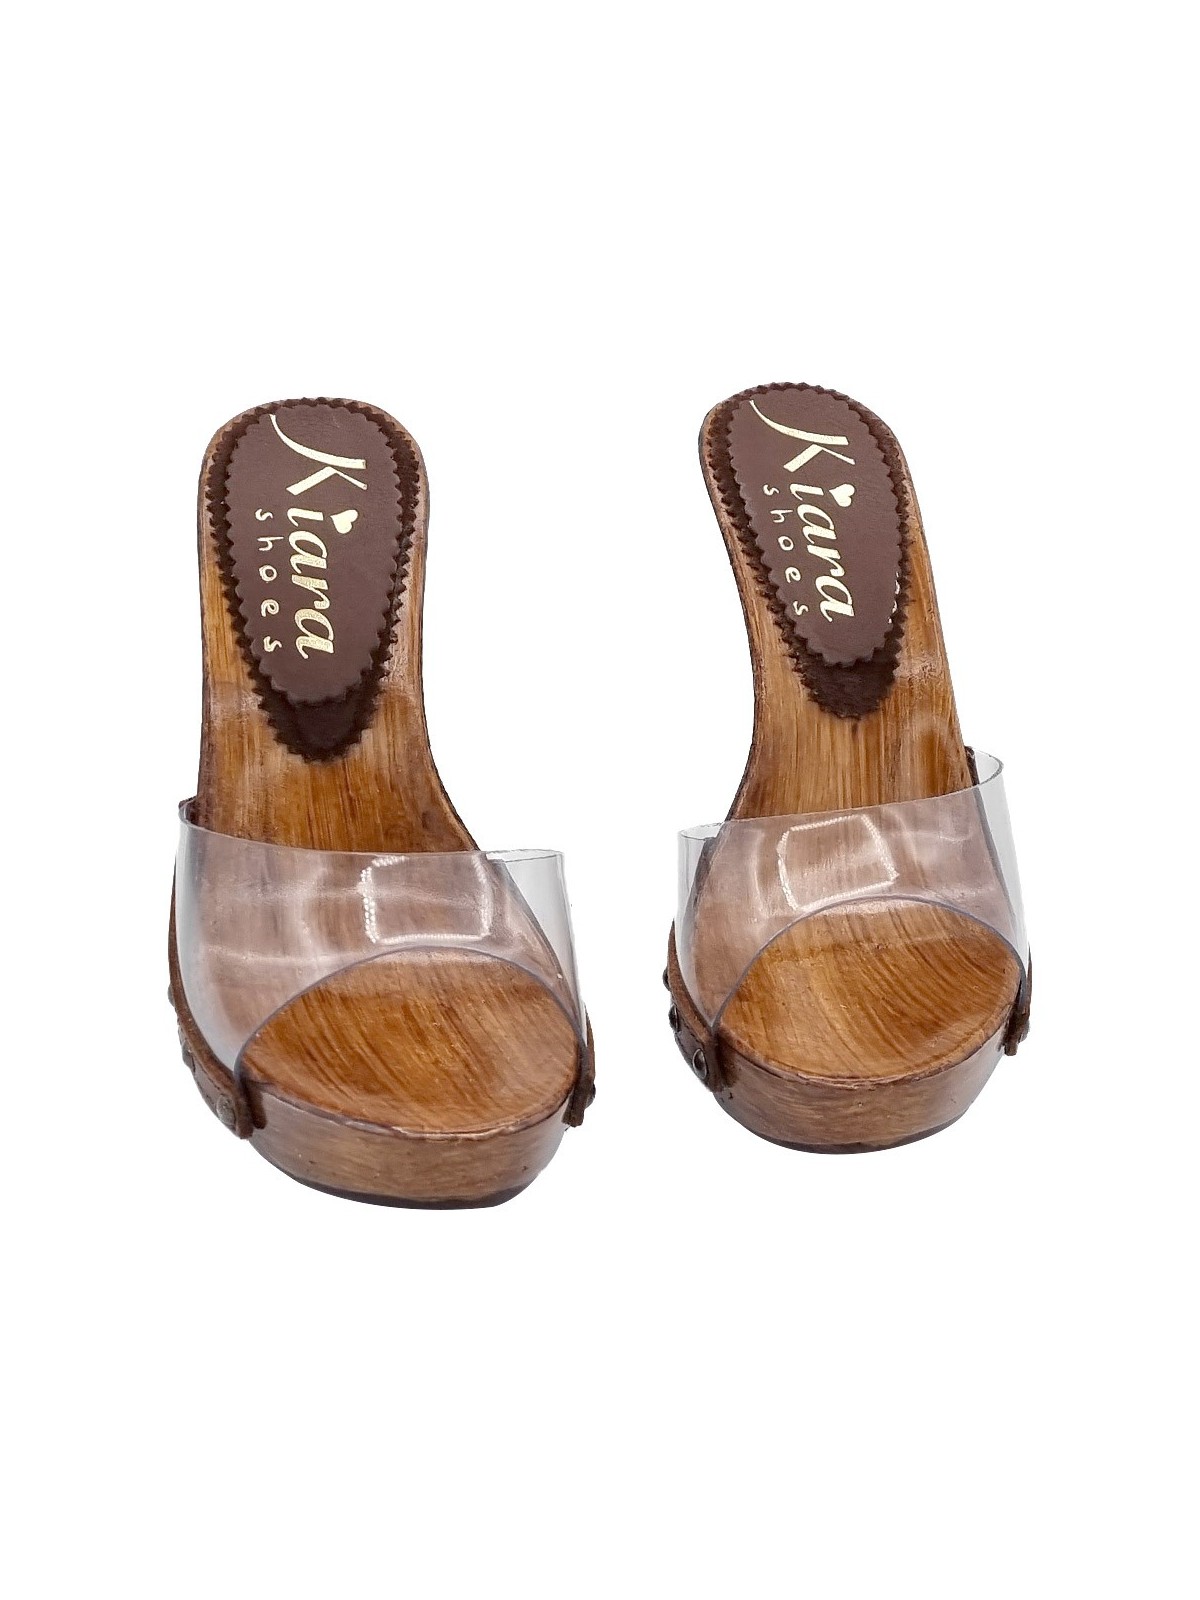 BROWN BASE SANDALS AND TRANSPARENT BAND